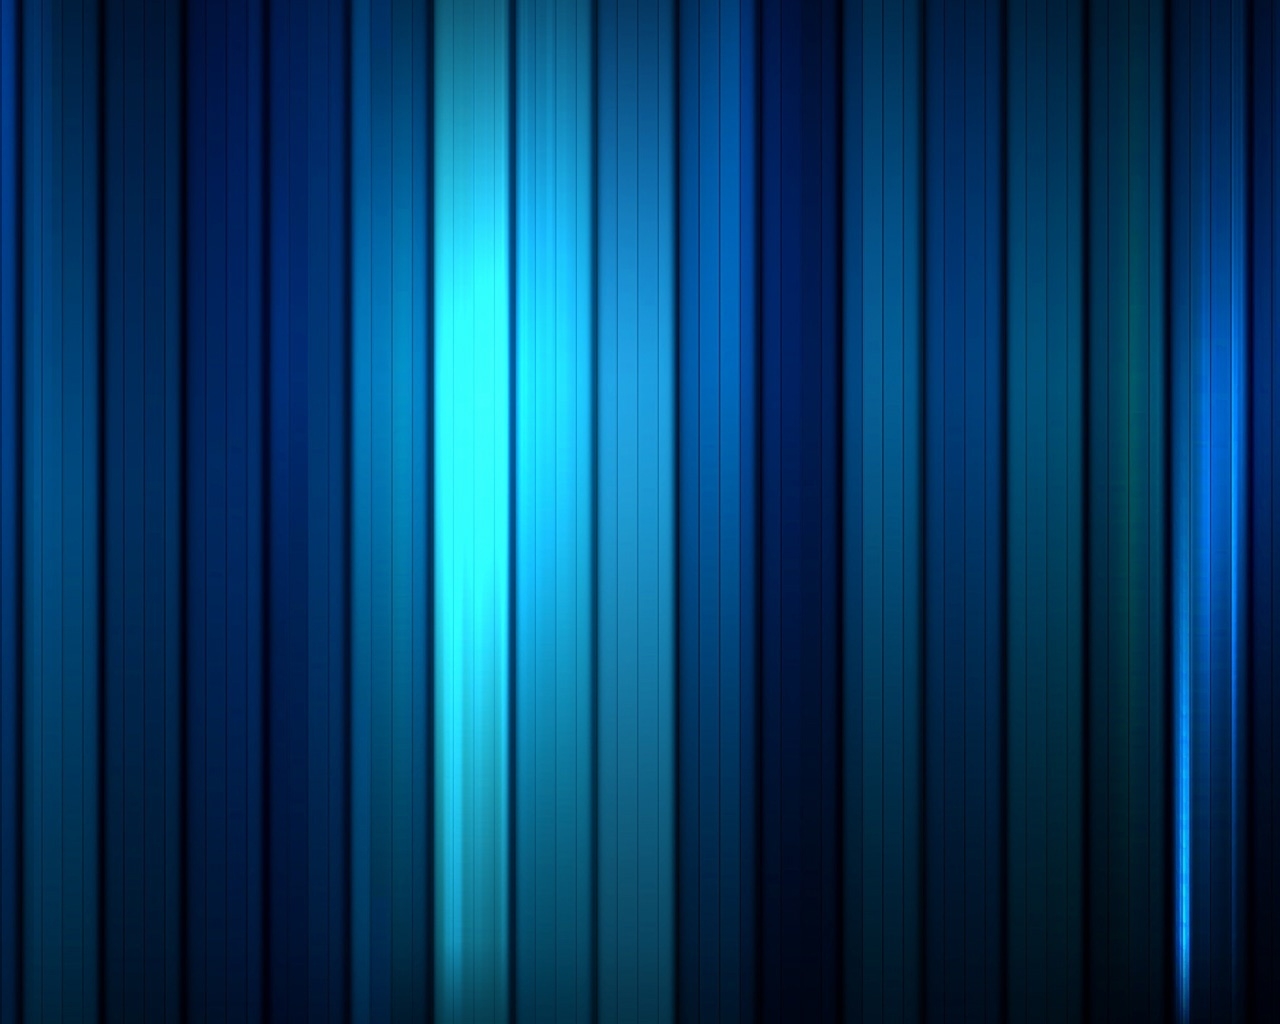 Motion Stripes for 1280 x 1024 resolution